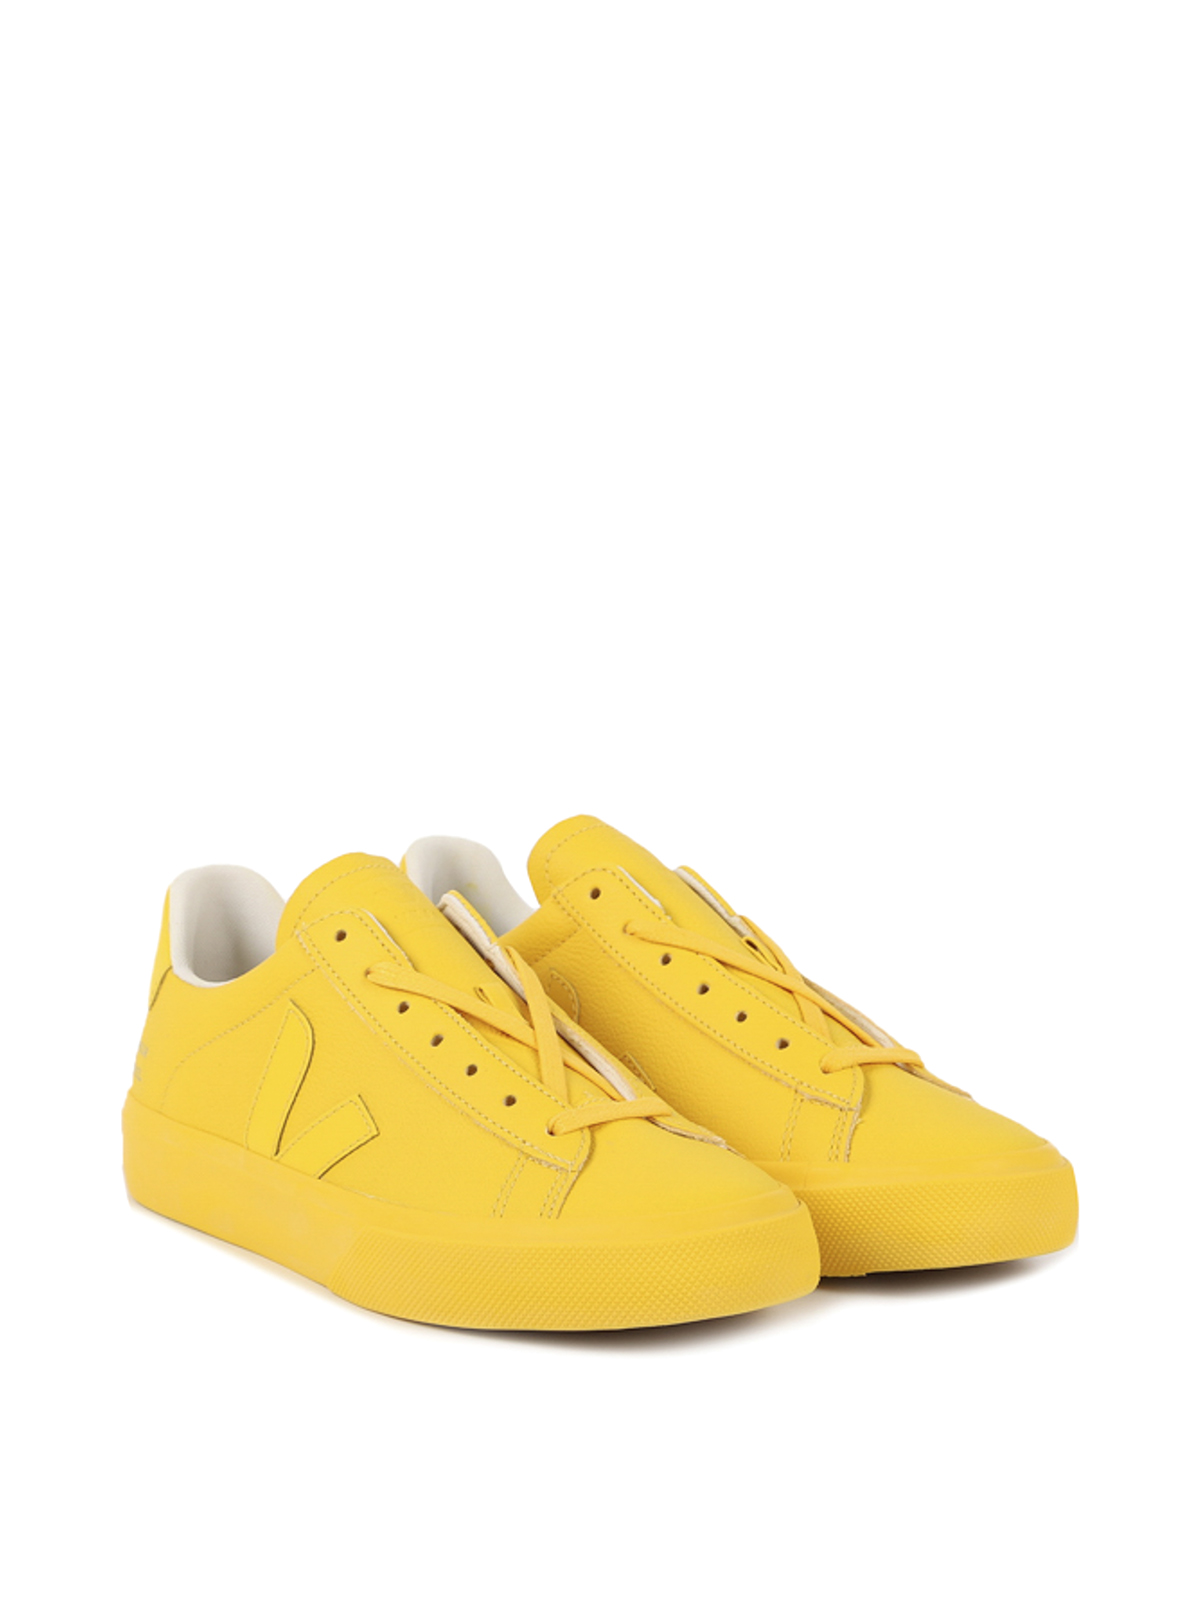 Trainers Veja - Sunshine sneakers - CP0502925 | thebs.com [ikrix.com]